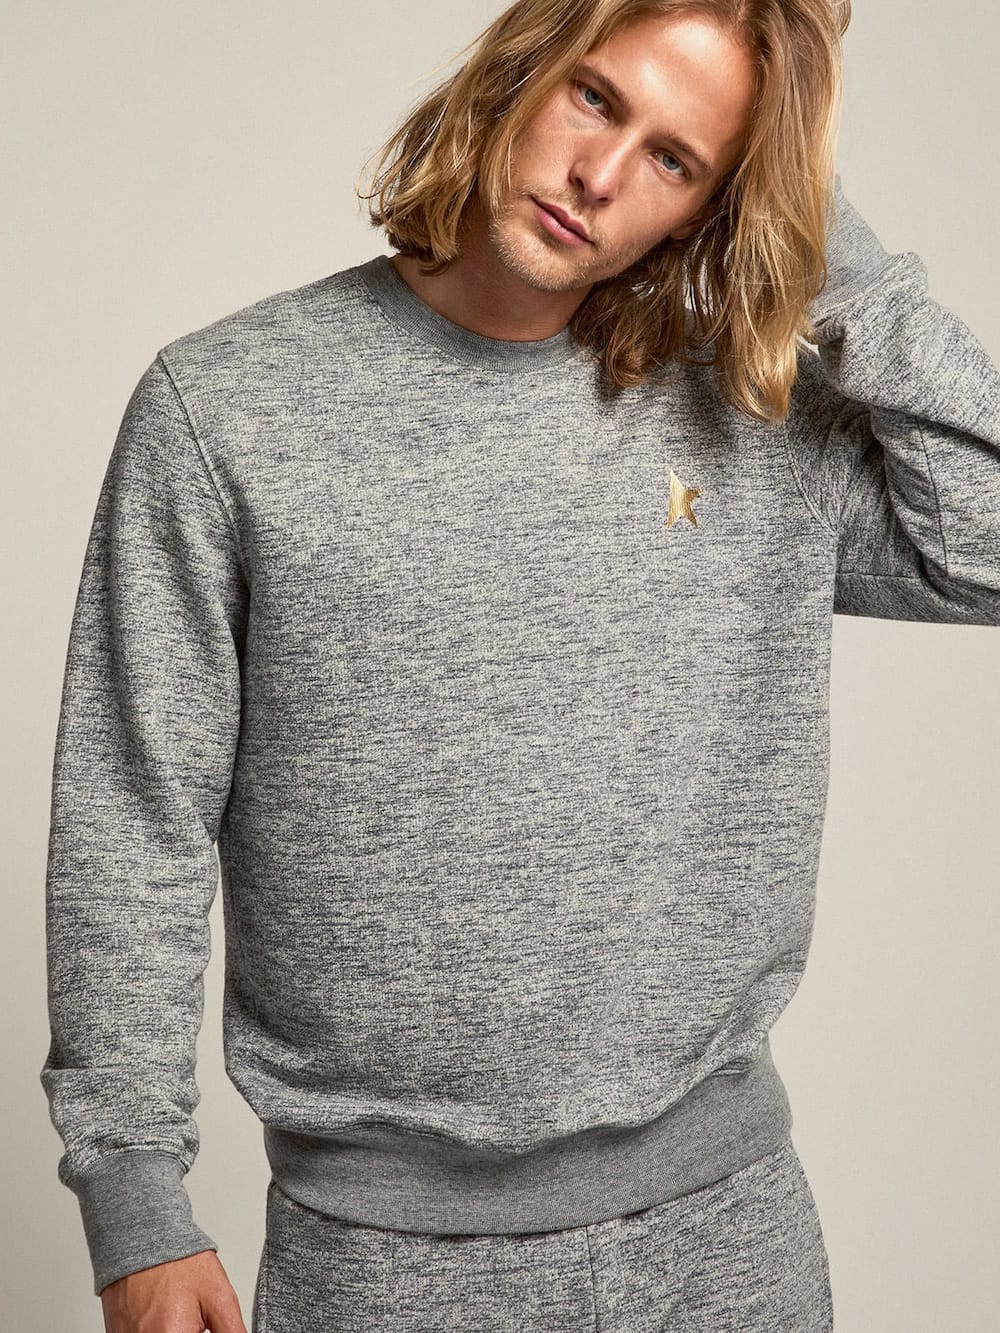 Golden Goose - Men's mélange gray cotton sweatshirt with gold star on the front in 